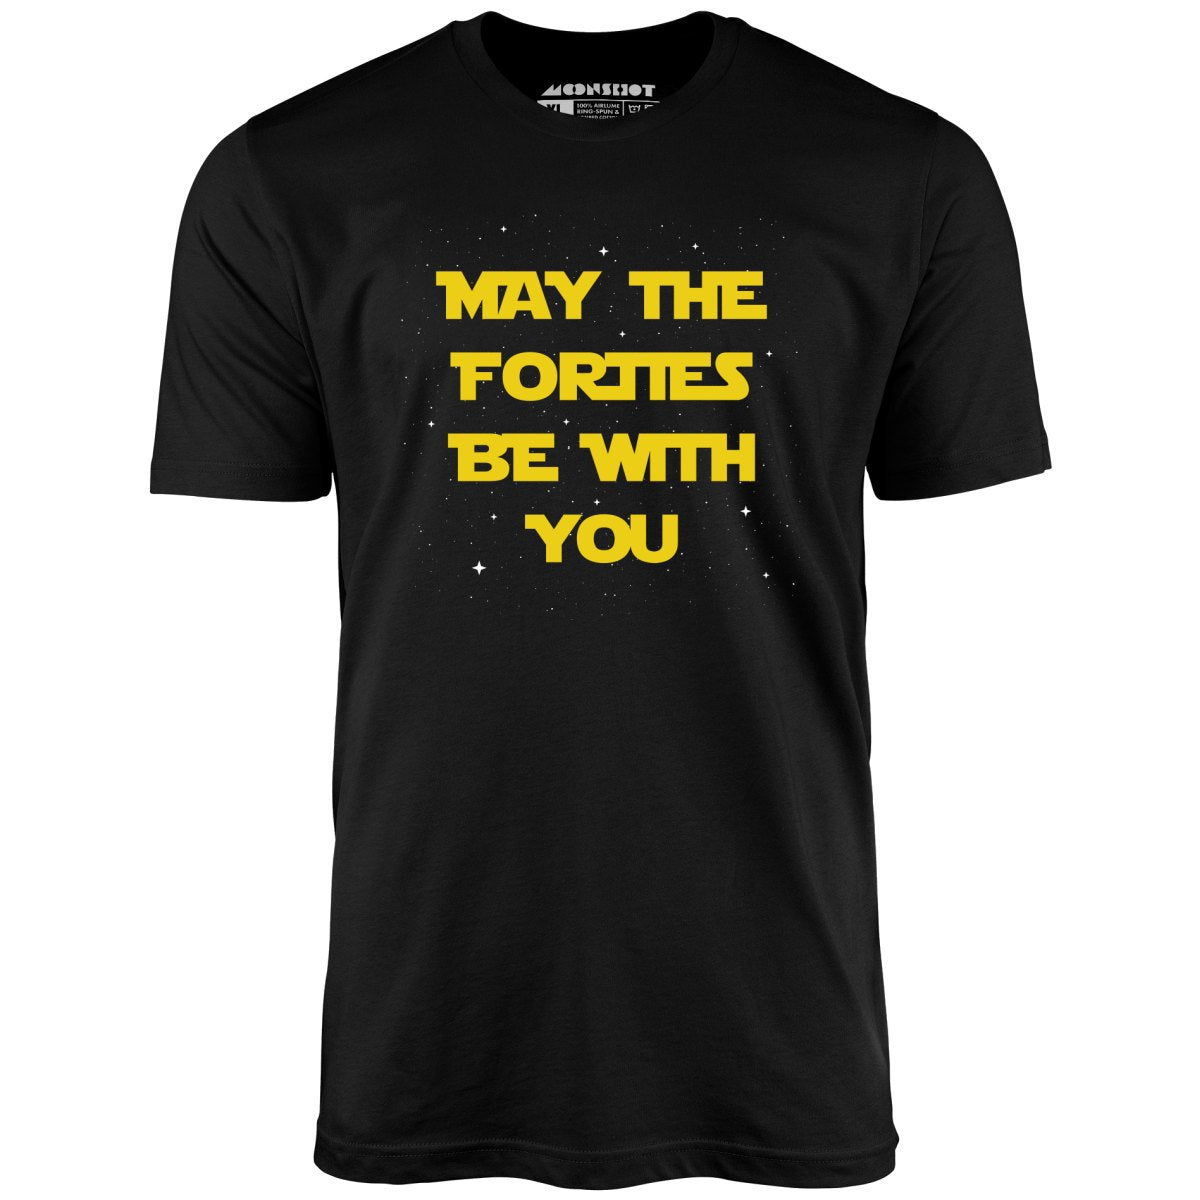 May The Forties Be With You - Unisex T-Shirt